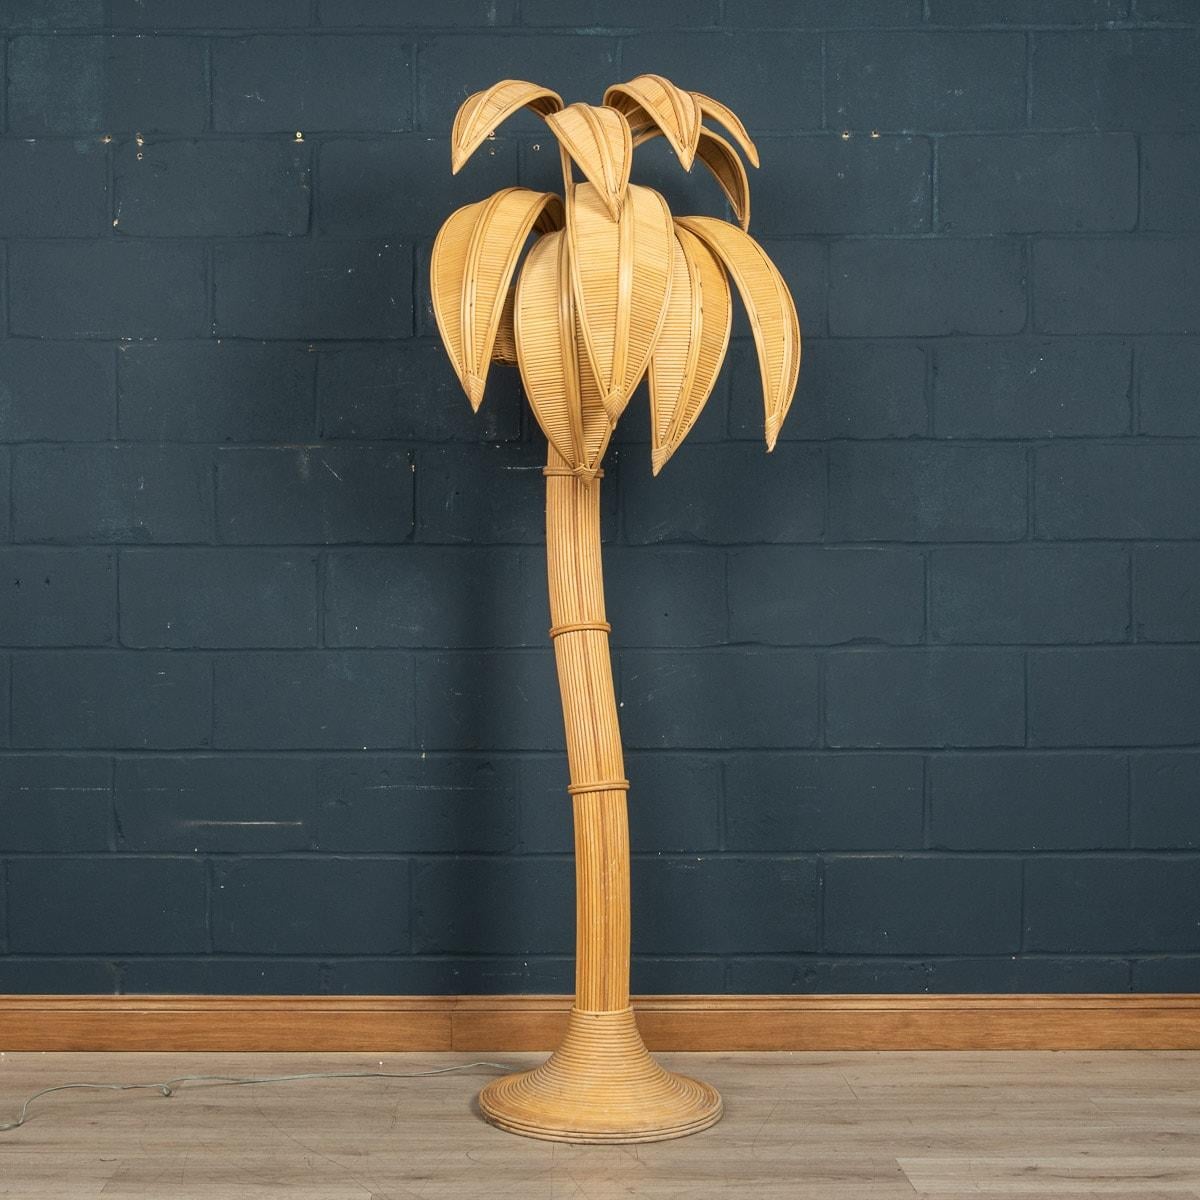 A wonderful mid 20th century palm tree floor lamp with woven coconut shades. This impressive floor light was designed by the Mexican artist Mario Lopez Torres who was well known for his sculptural wicker creations in the mid 1970s and sold by